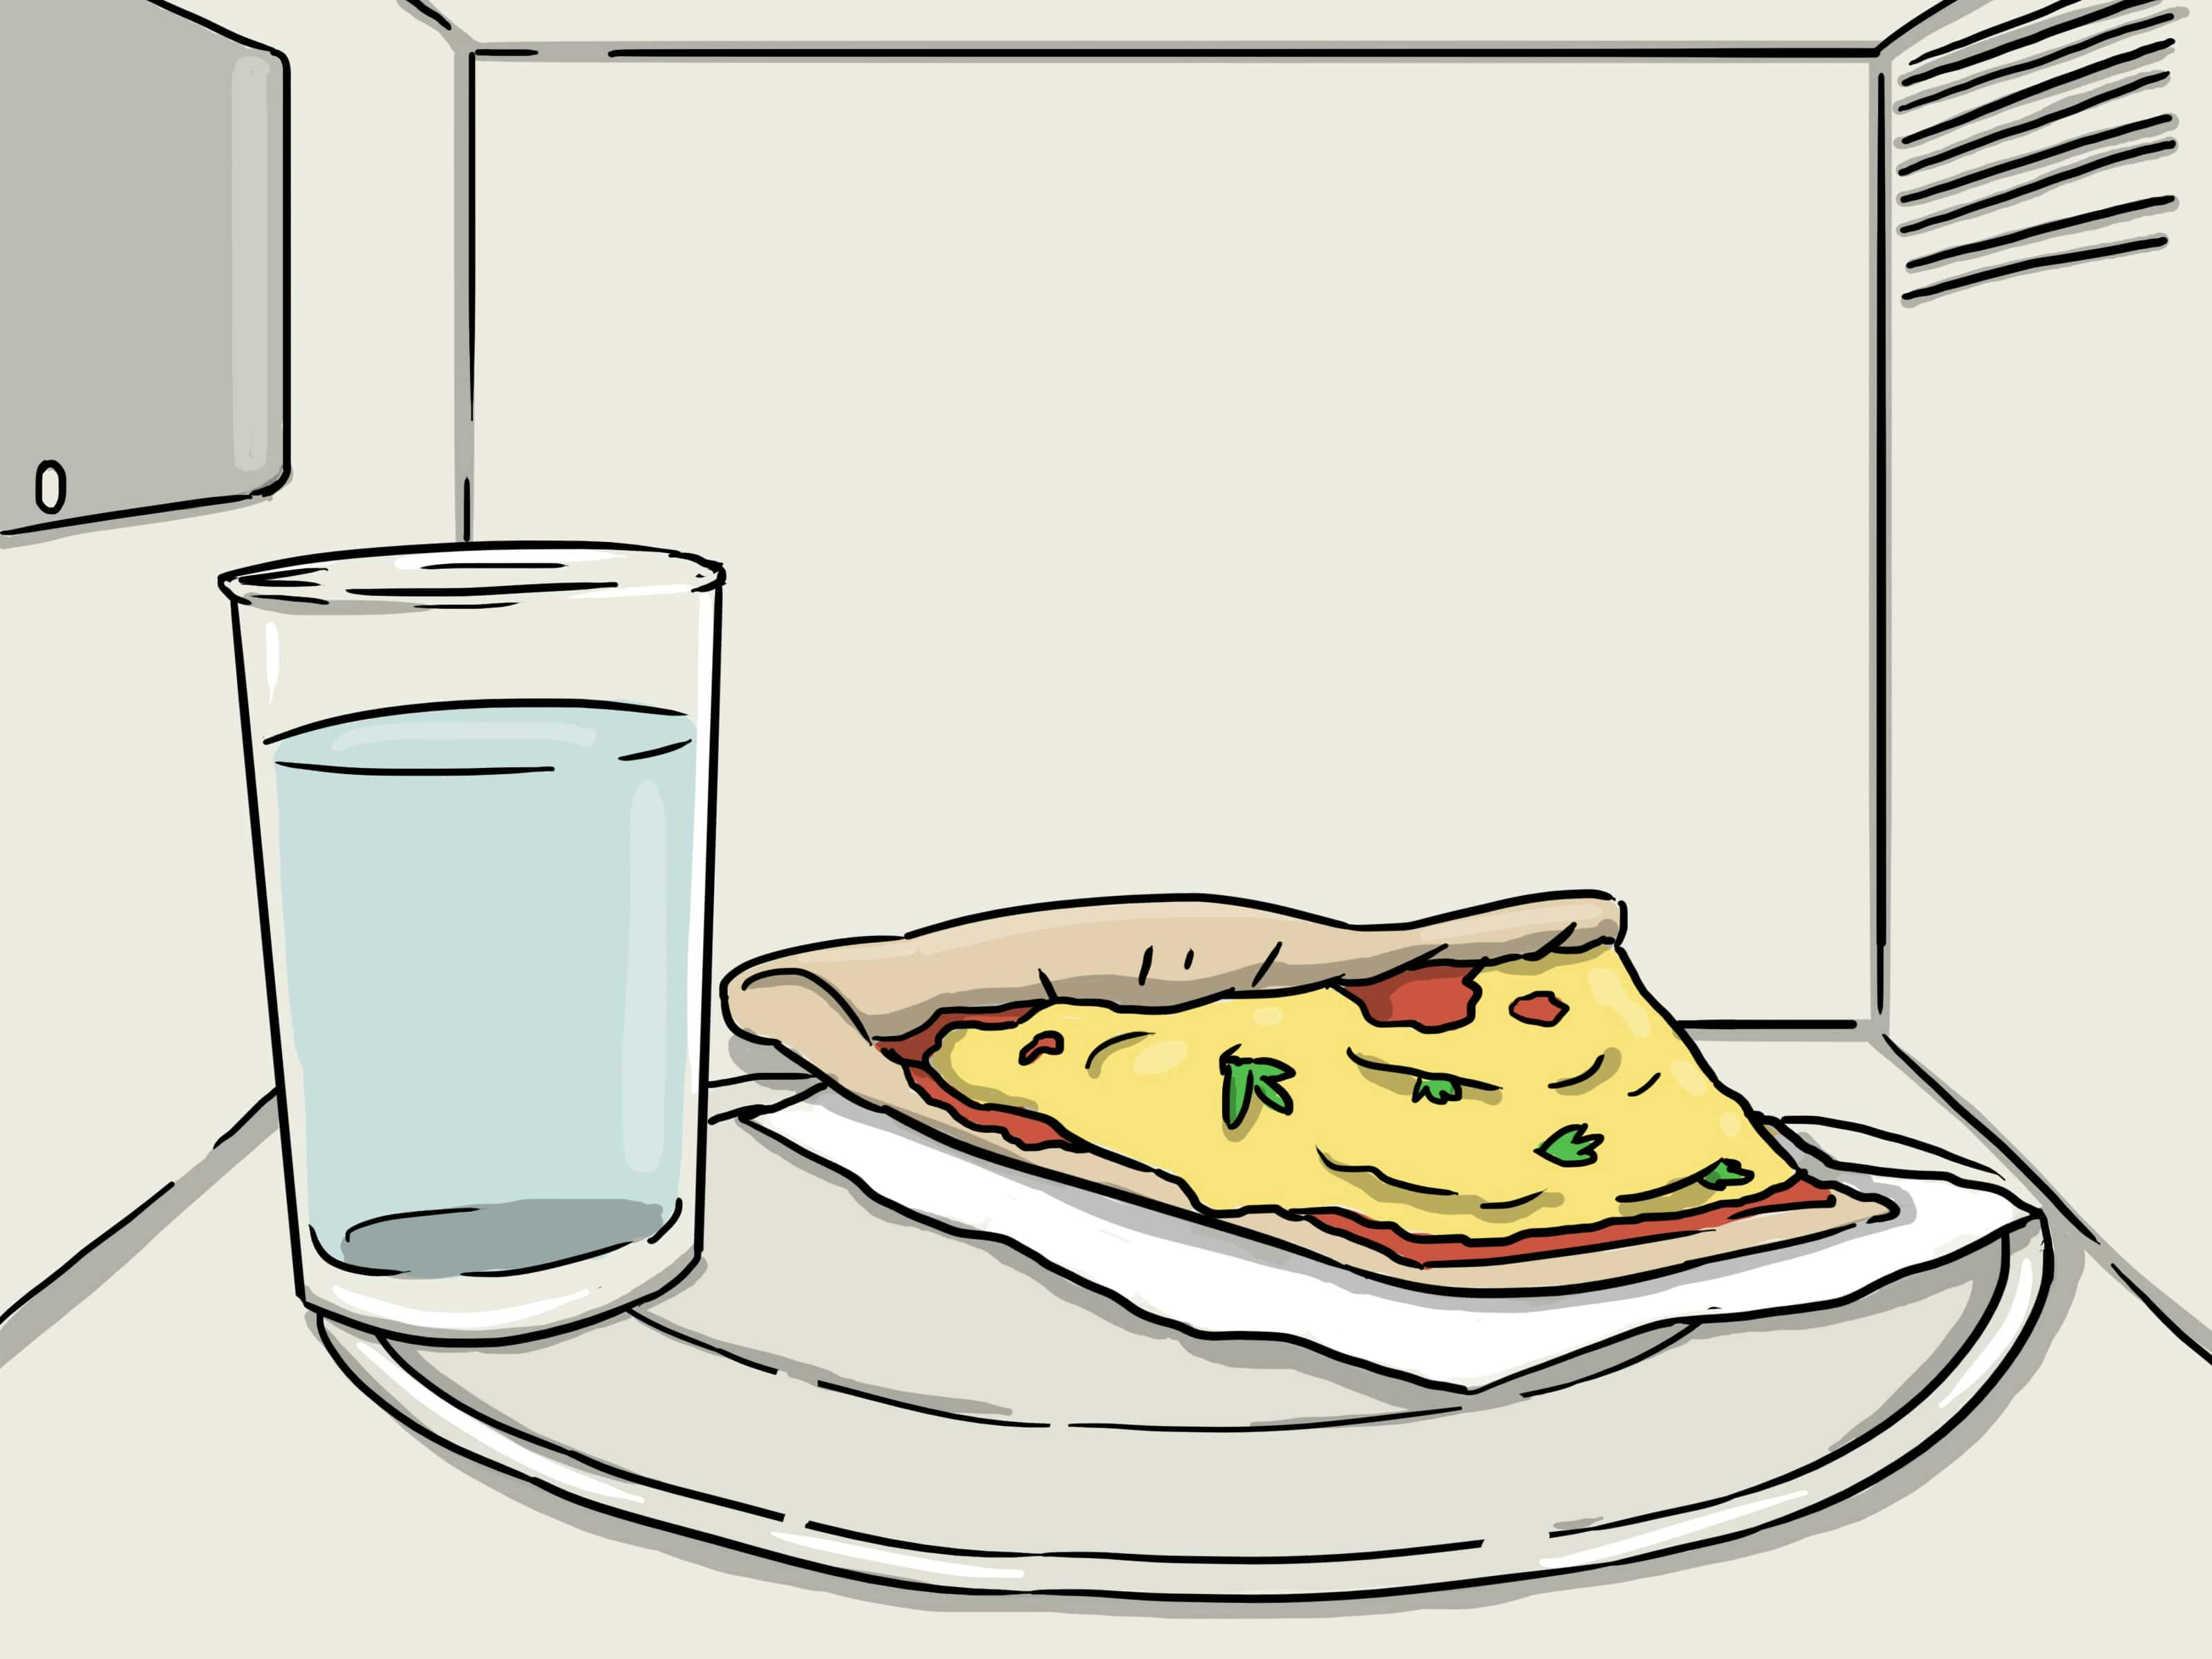 When speed matters: Microwave your pizza slice with a glass of water for a quick solution.